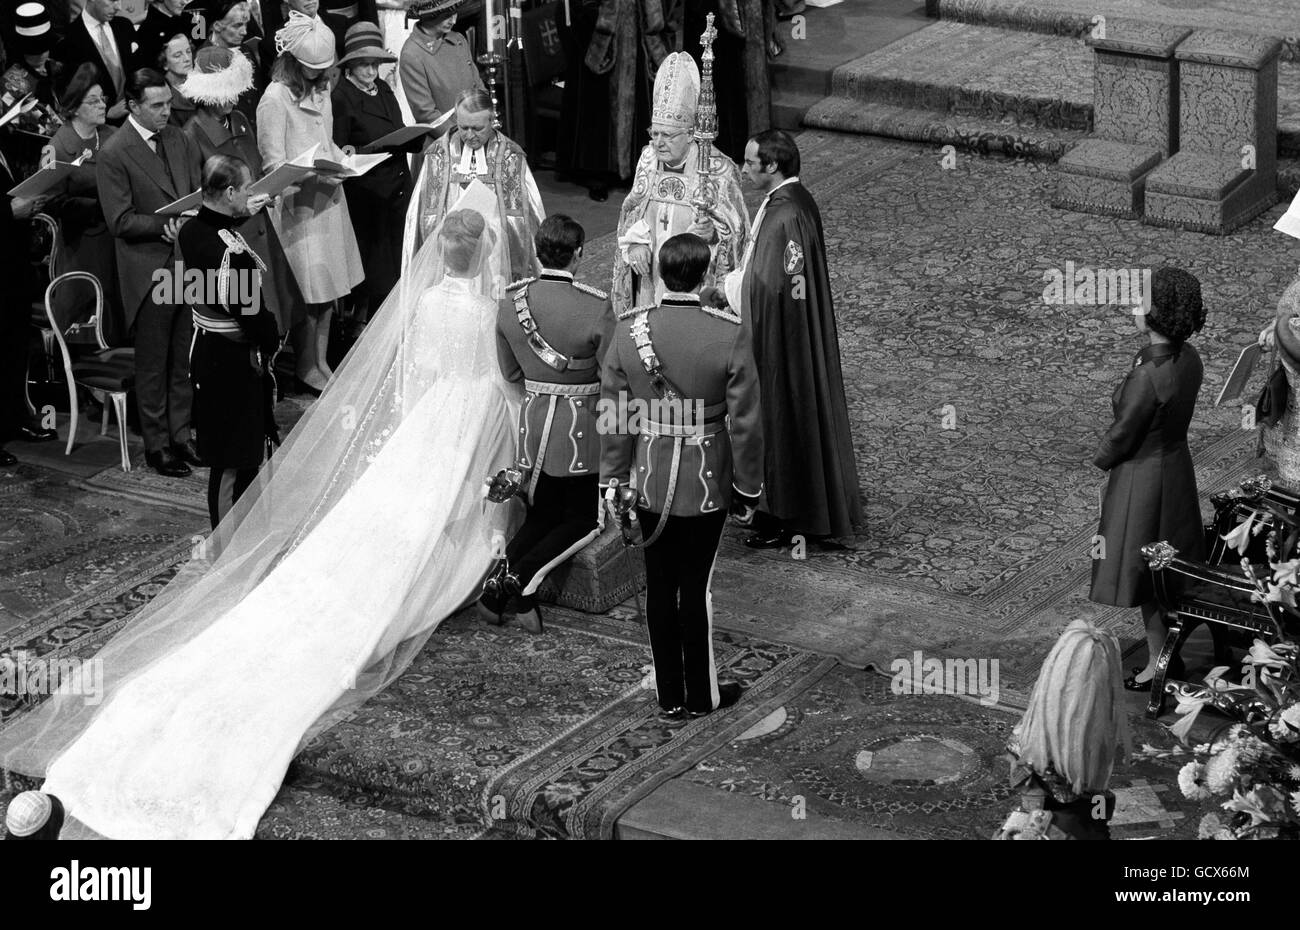 Royalty - Princess Anne and Captain Mark Phillips Wedding - London Stock Photo